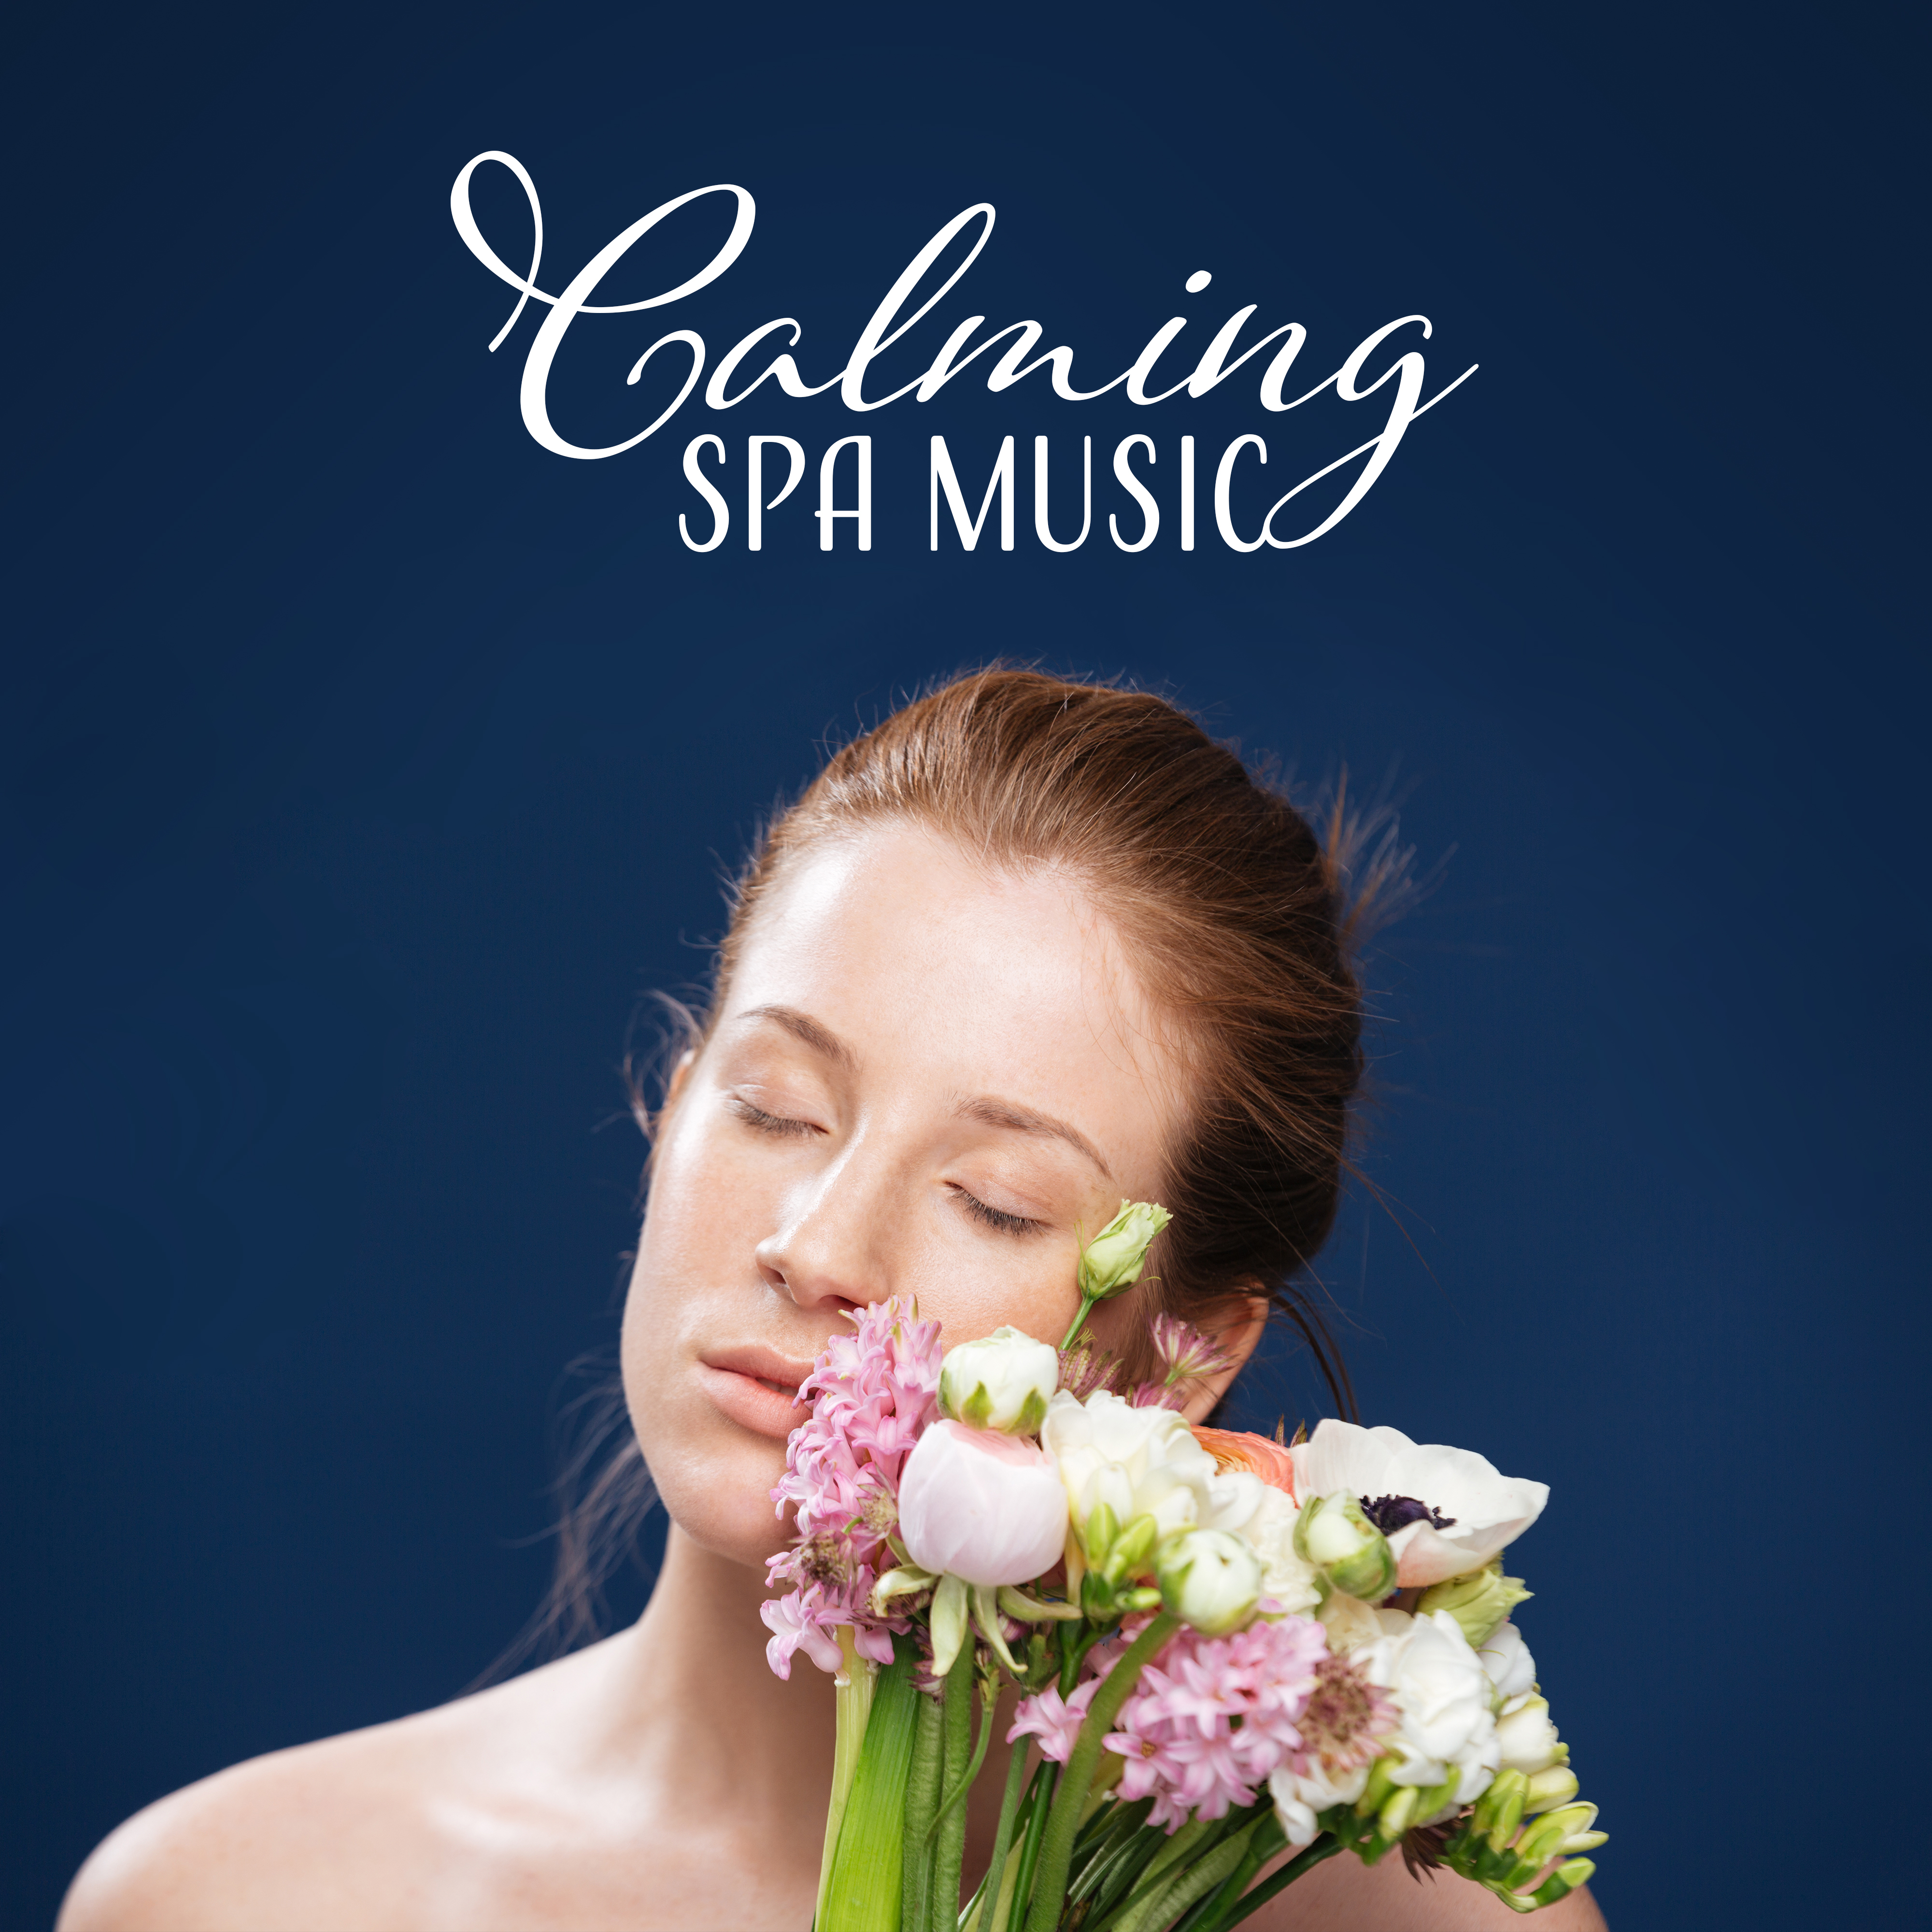 Calming Spa Music  Relaxing Music for Spa, Beauty Treatments, Hotel Wellness, Nature Sounds